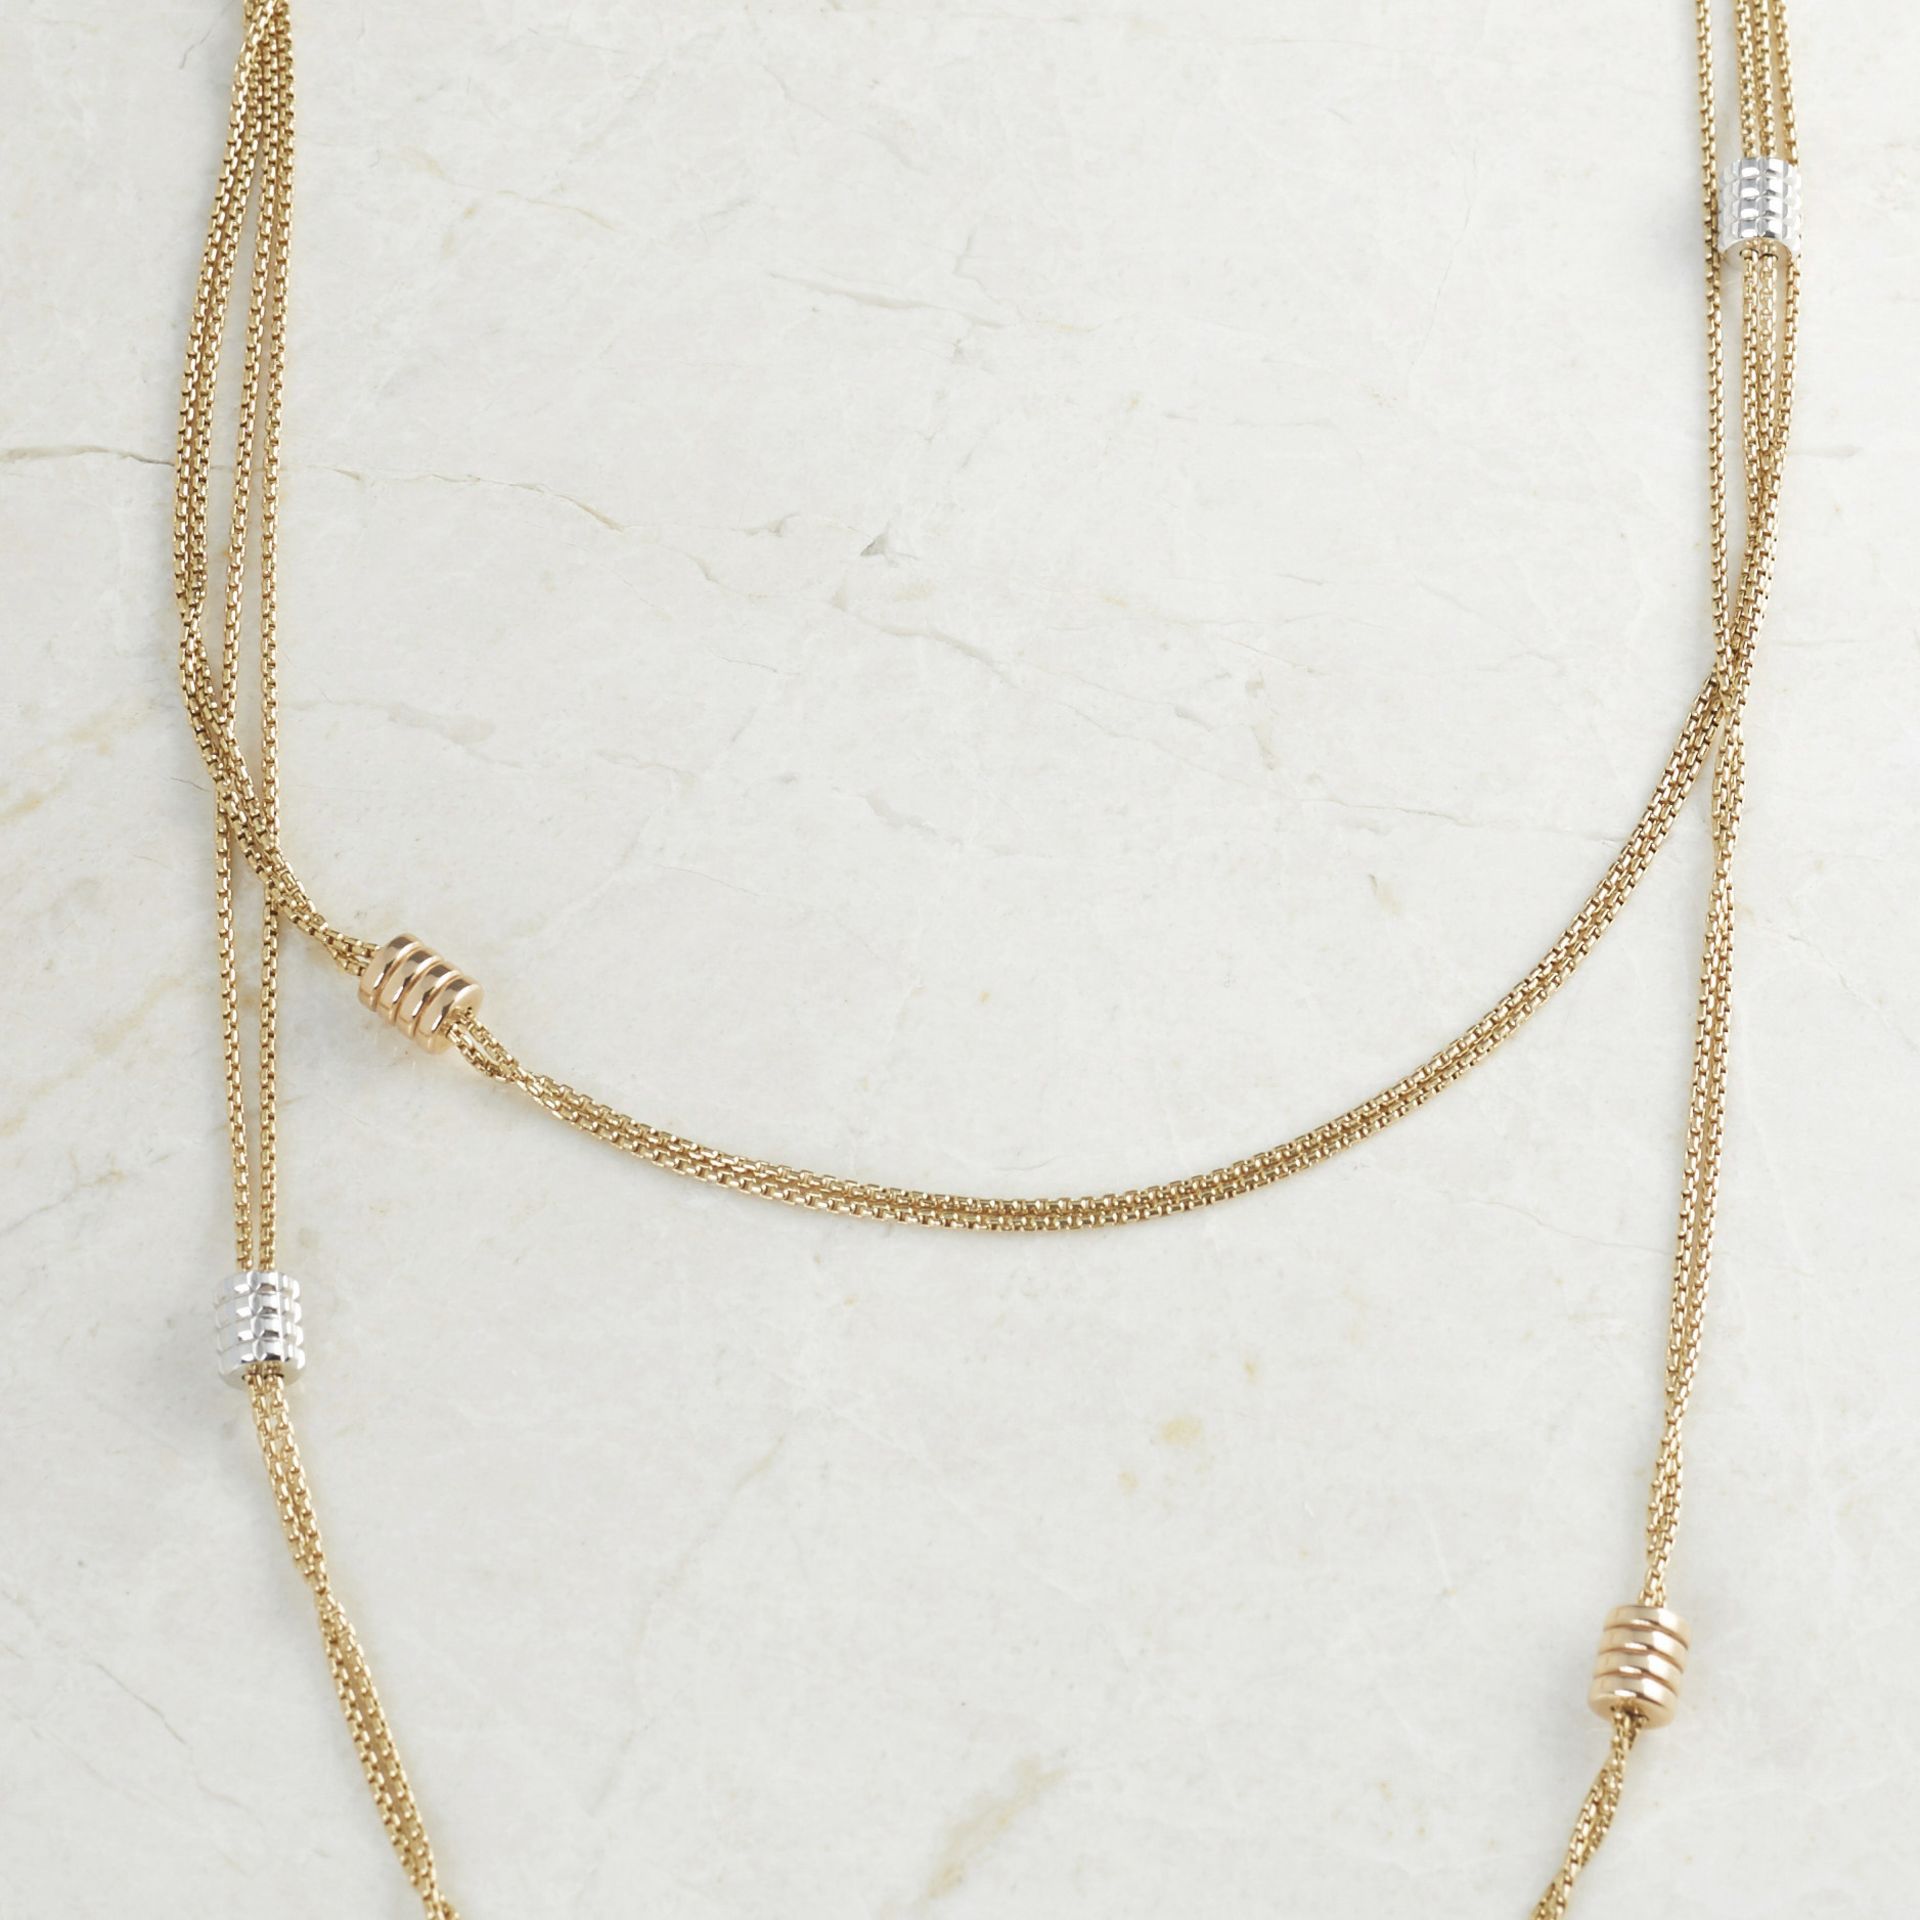 18k Yellow Gold Chain Necklace - Image 3 of 7